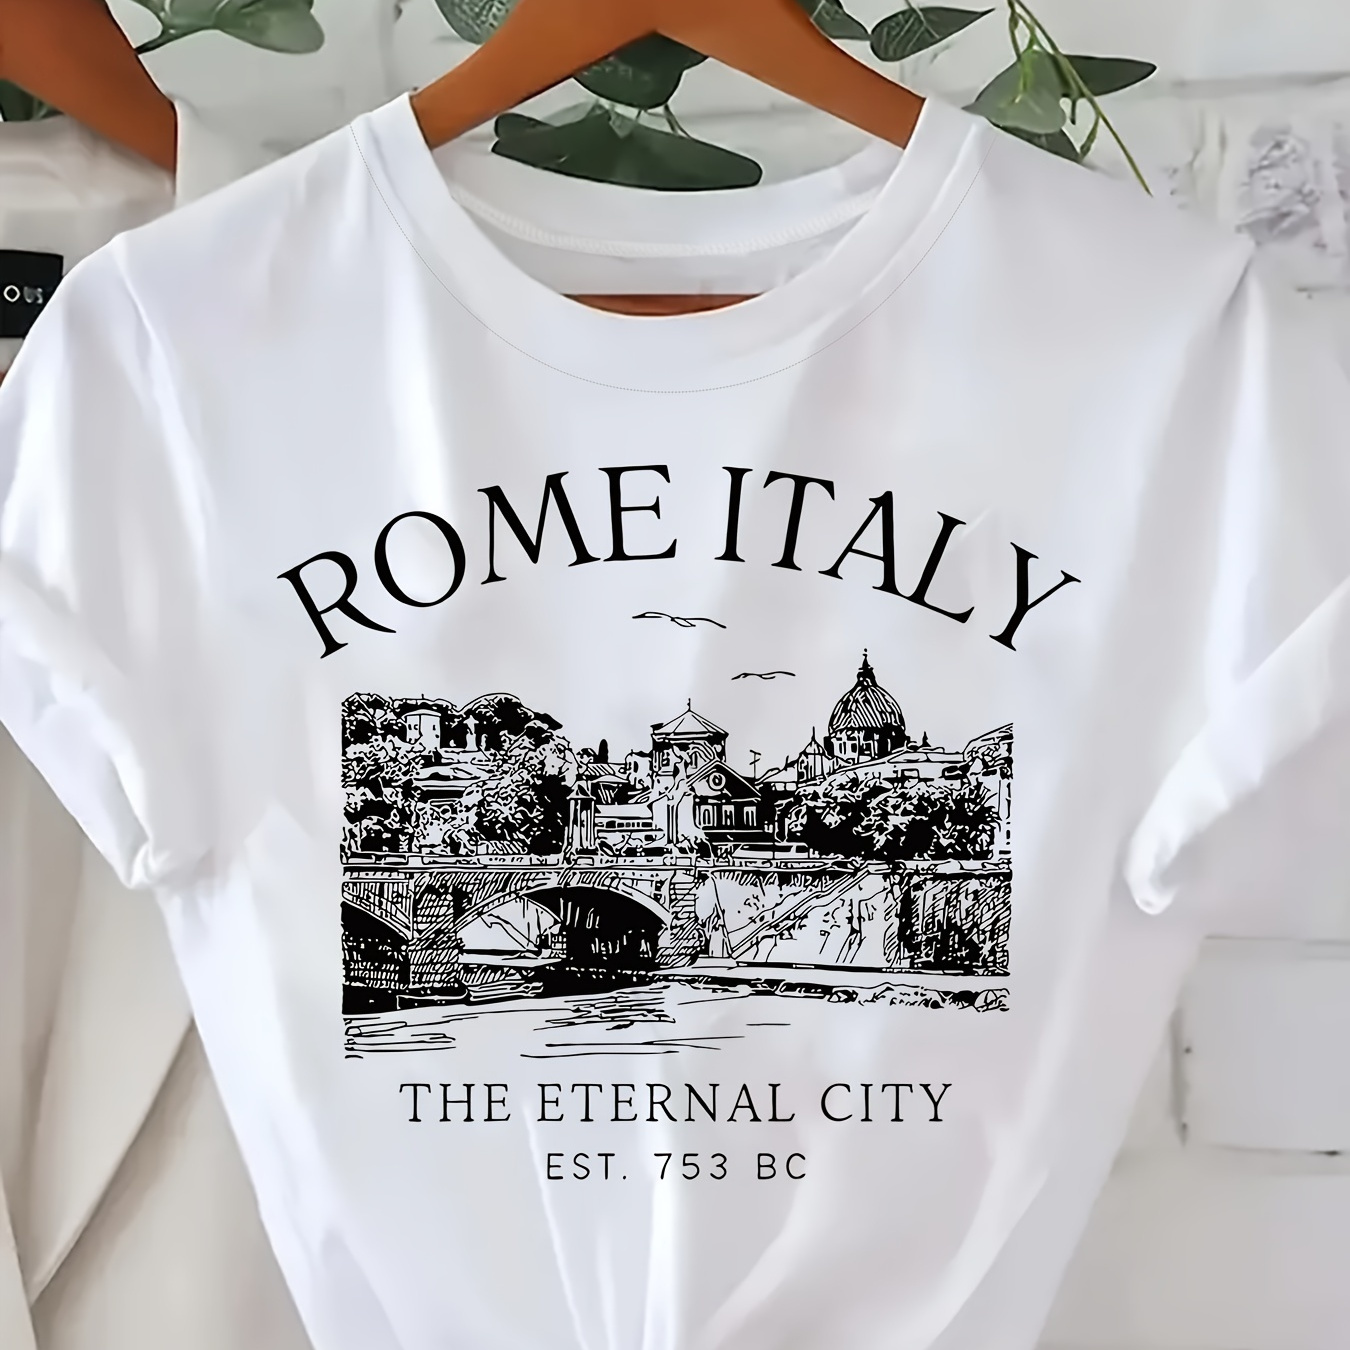 

Plus Size Letter & Graphic Print T-shirt, Casual Rome Italy Pattern Short Sleeve Crew Neck Top For Summer & Spring, Women's Plus Size Clothing